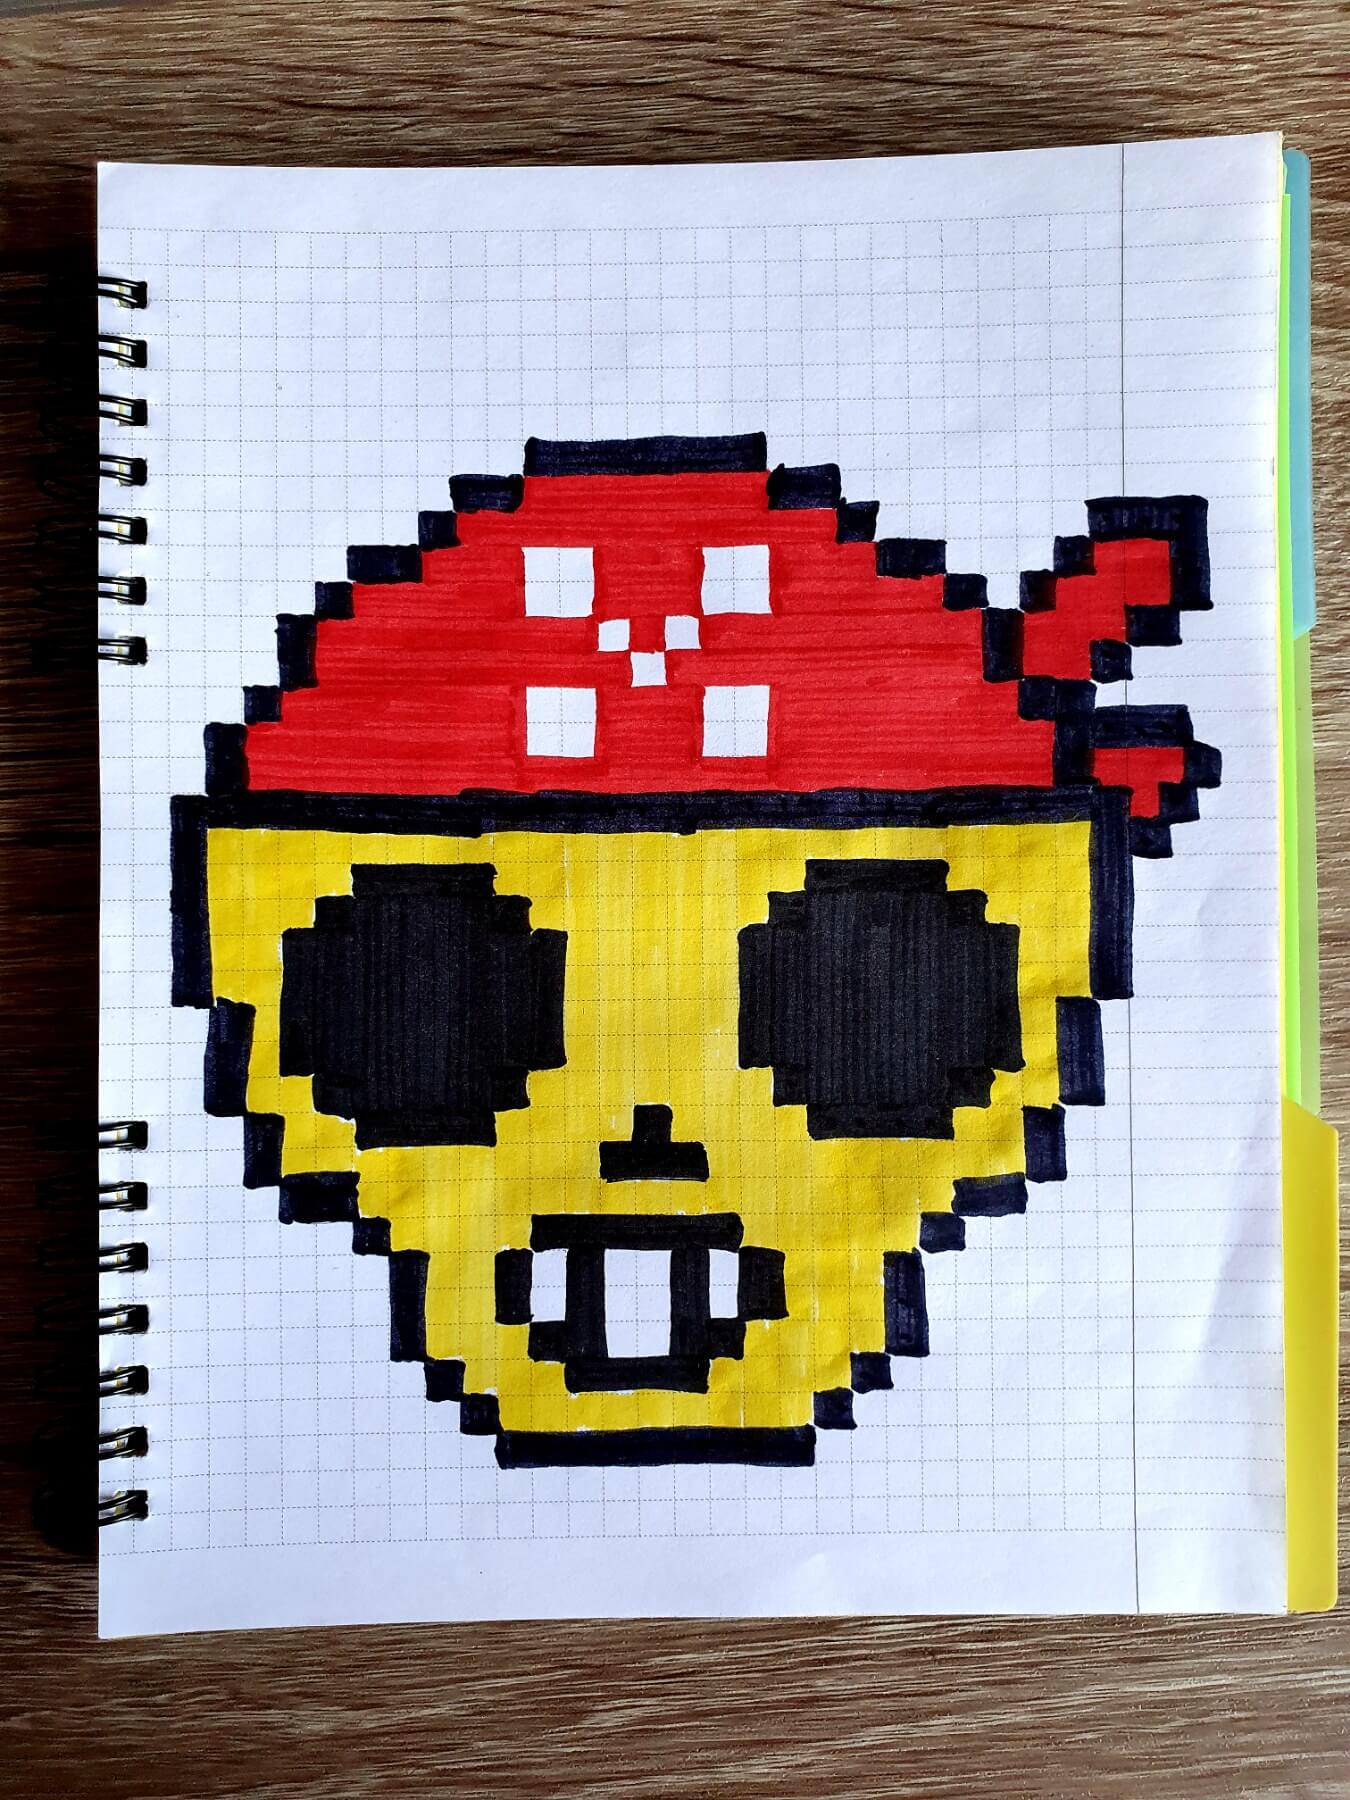 So far from Brawl Stars. Drawing on the cells. drawings by cells, pixel art, pixel drawings